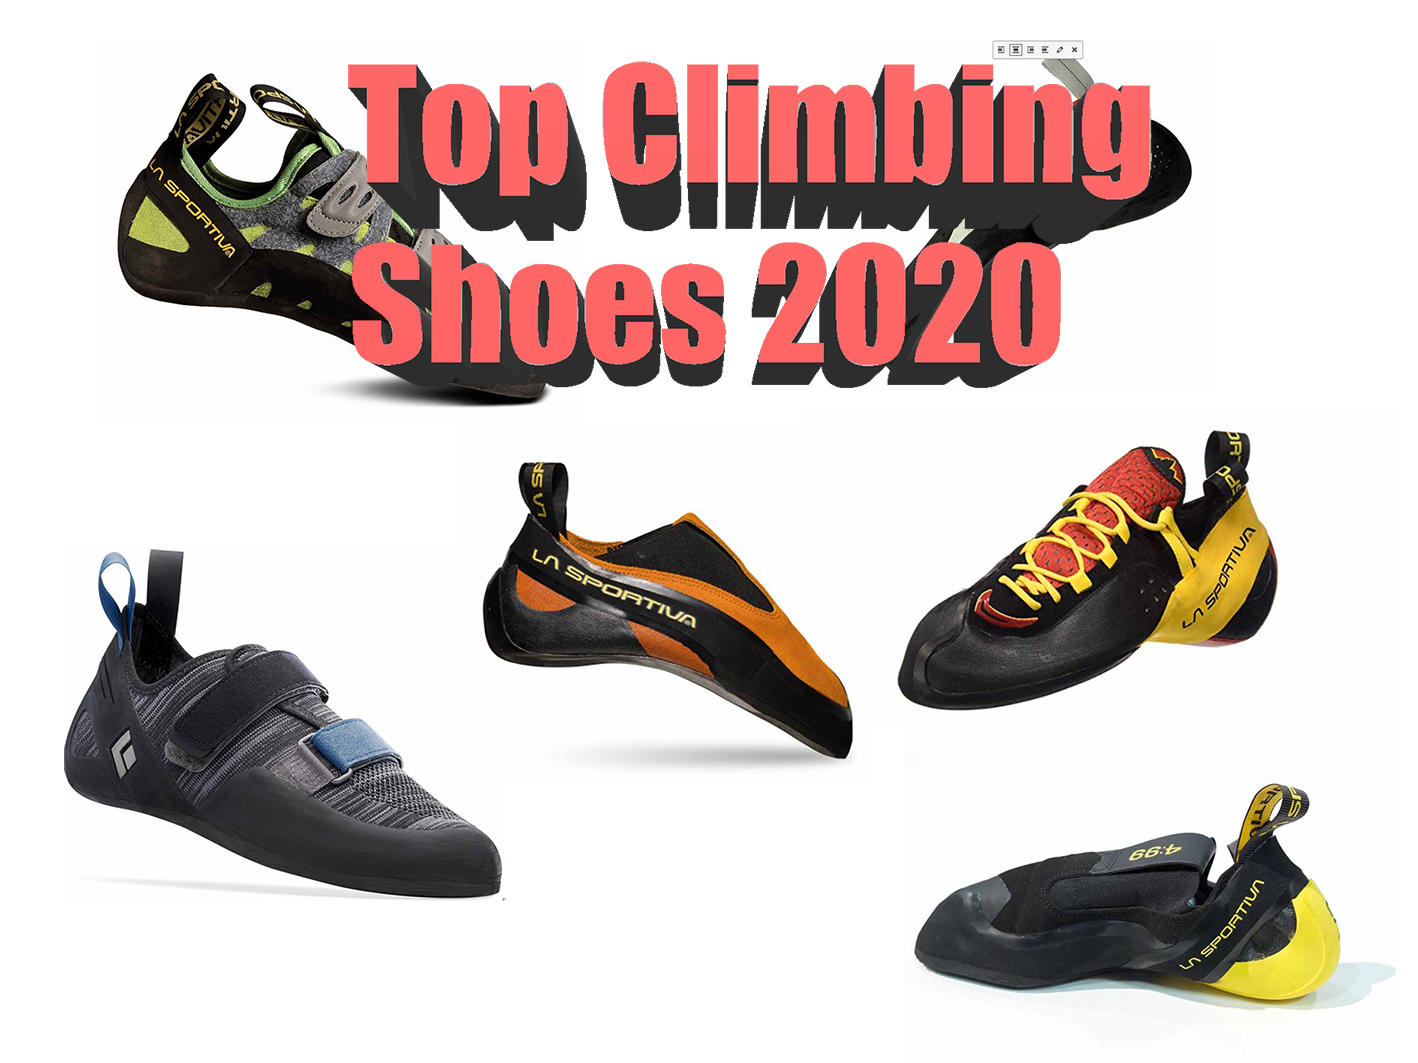 Best Climbing Shoes for 2020 for 